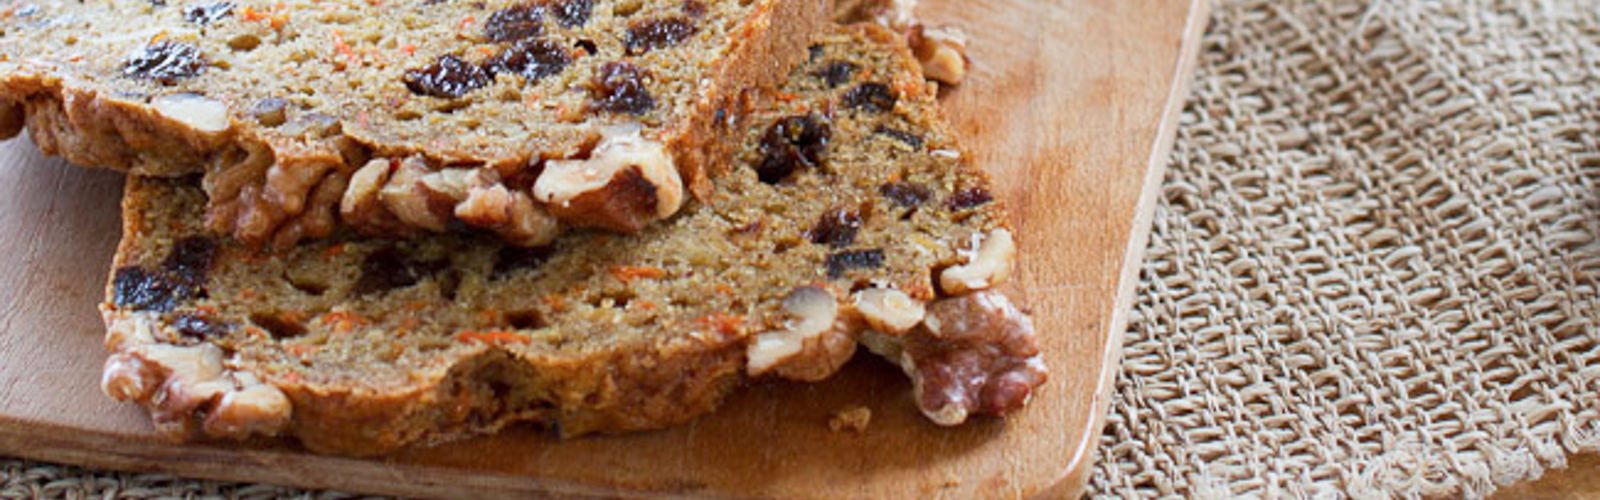 Packed with spices, this prune and carrot quickbread is sweet and indulgent while also being wholesome and lower in sugar.